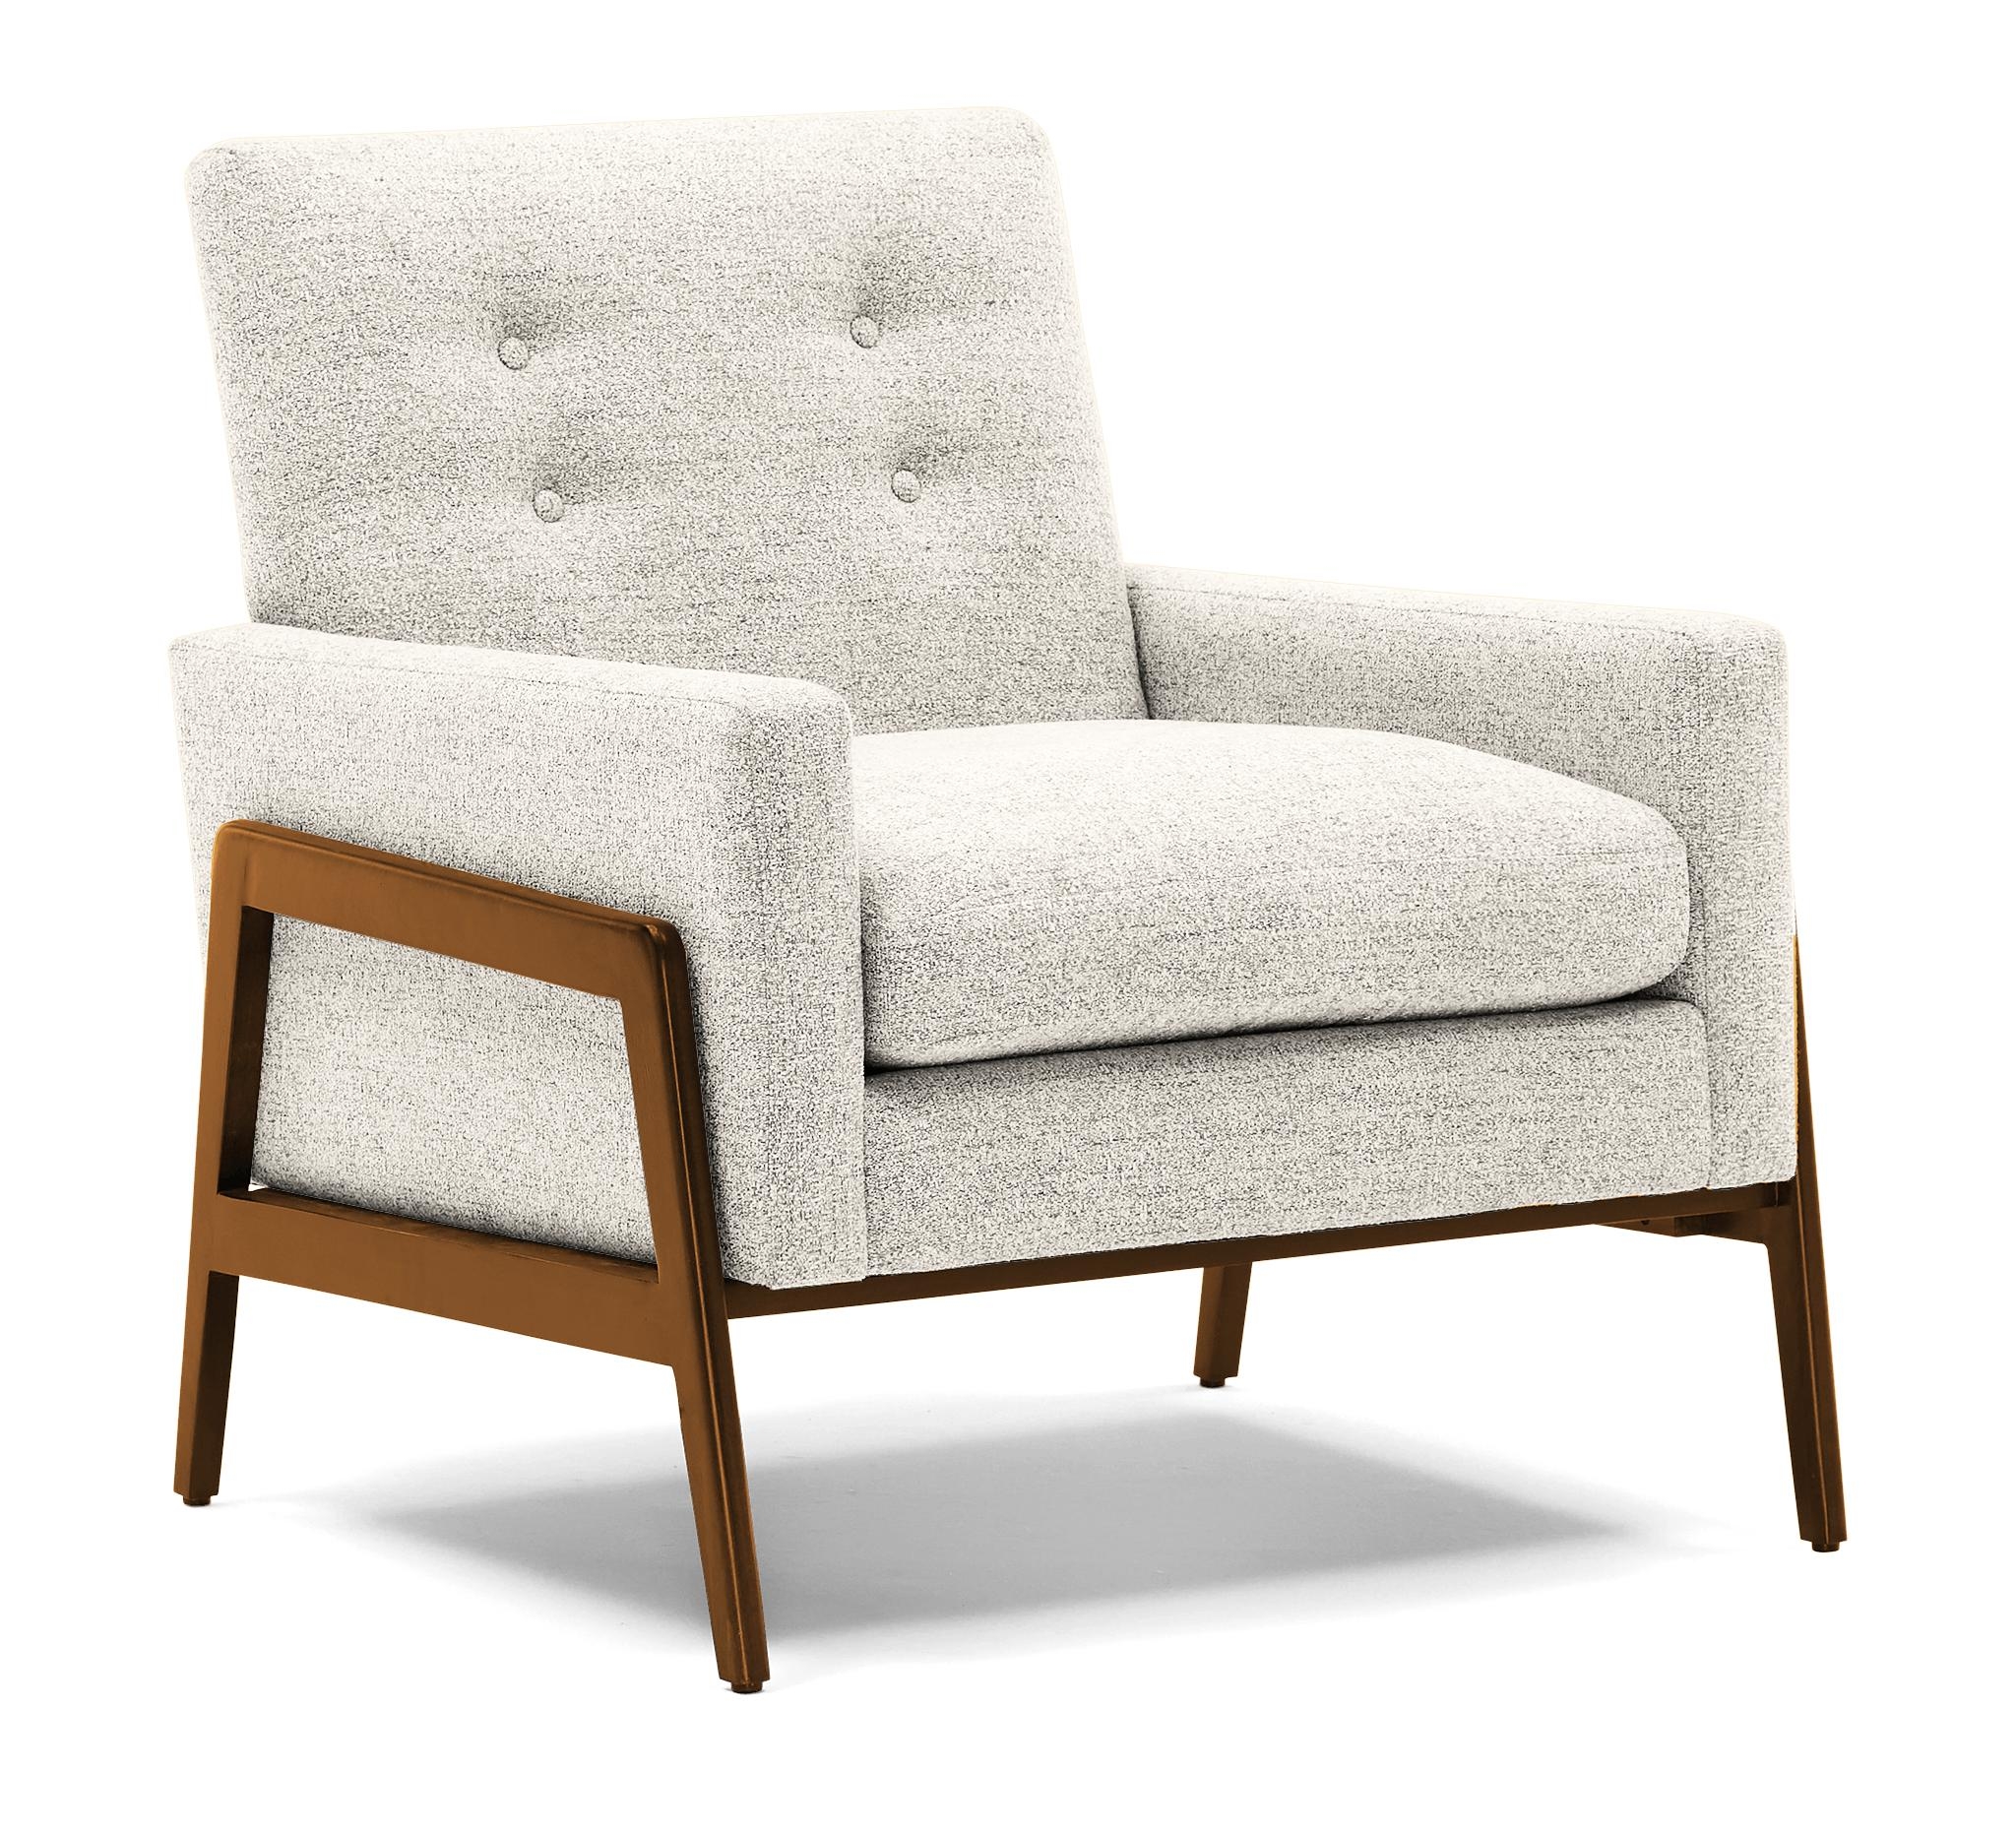 White Clyde Mid Century Modern Chair - Tussah Snow - Mocha - Image 1